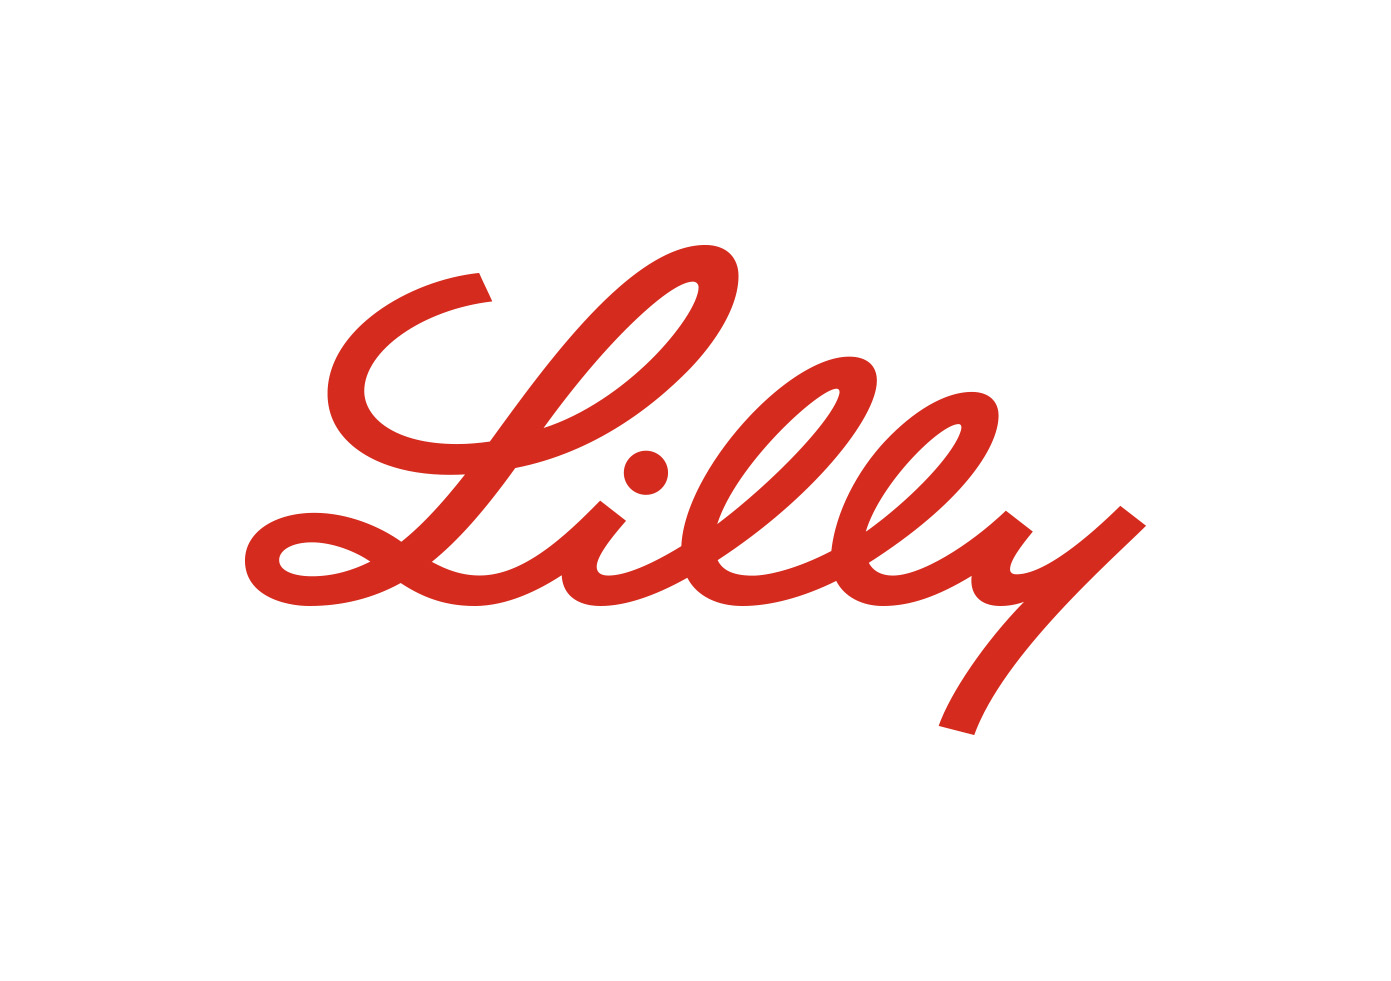 Lilly Announces the Institute for Genetic Medicine and $700 Million investment in Boston Seaport Site